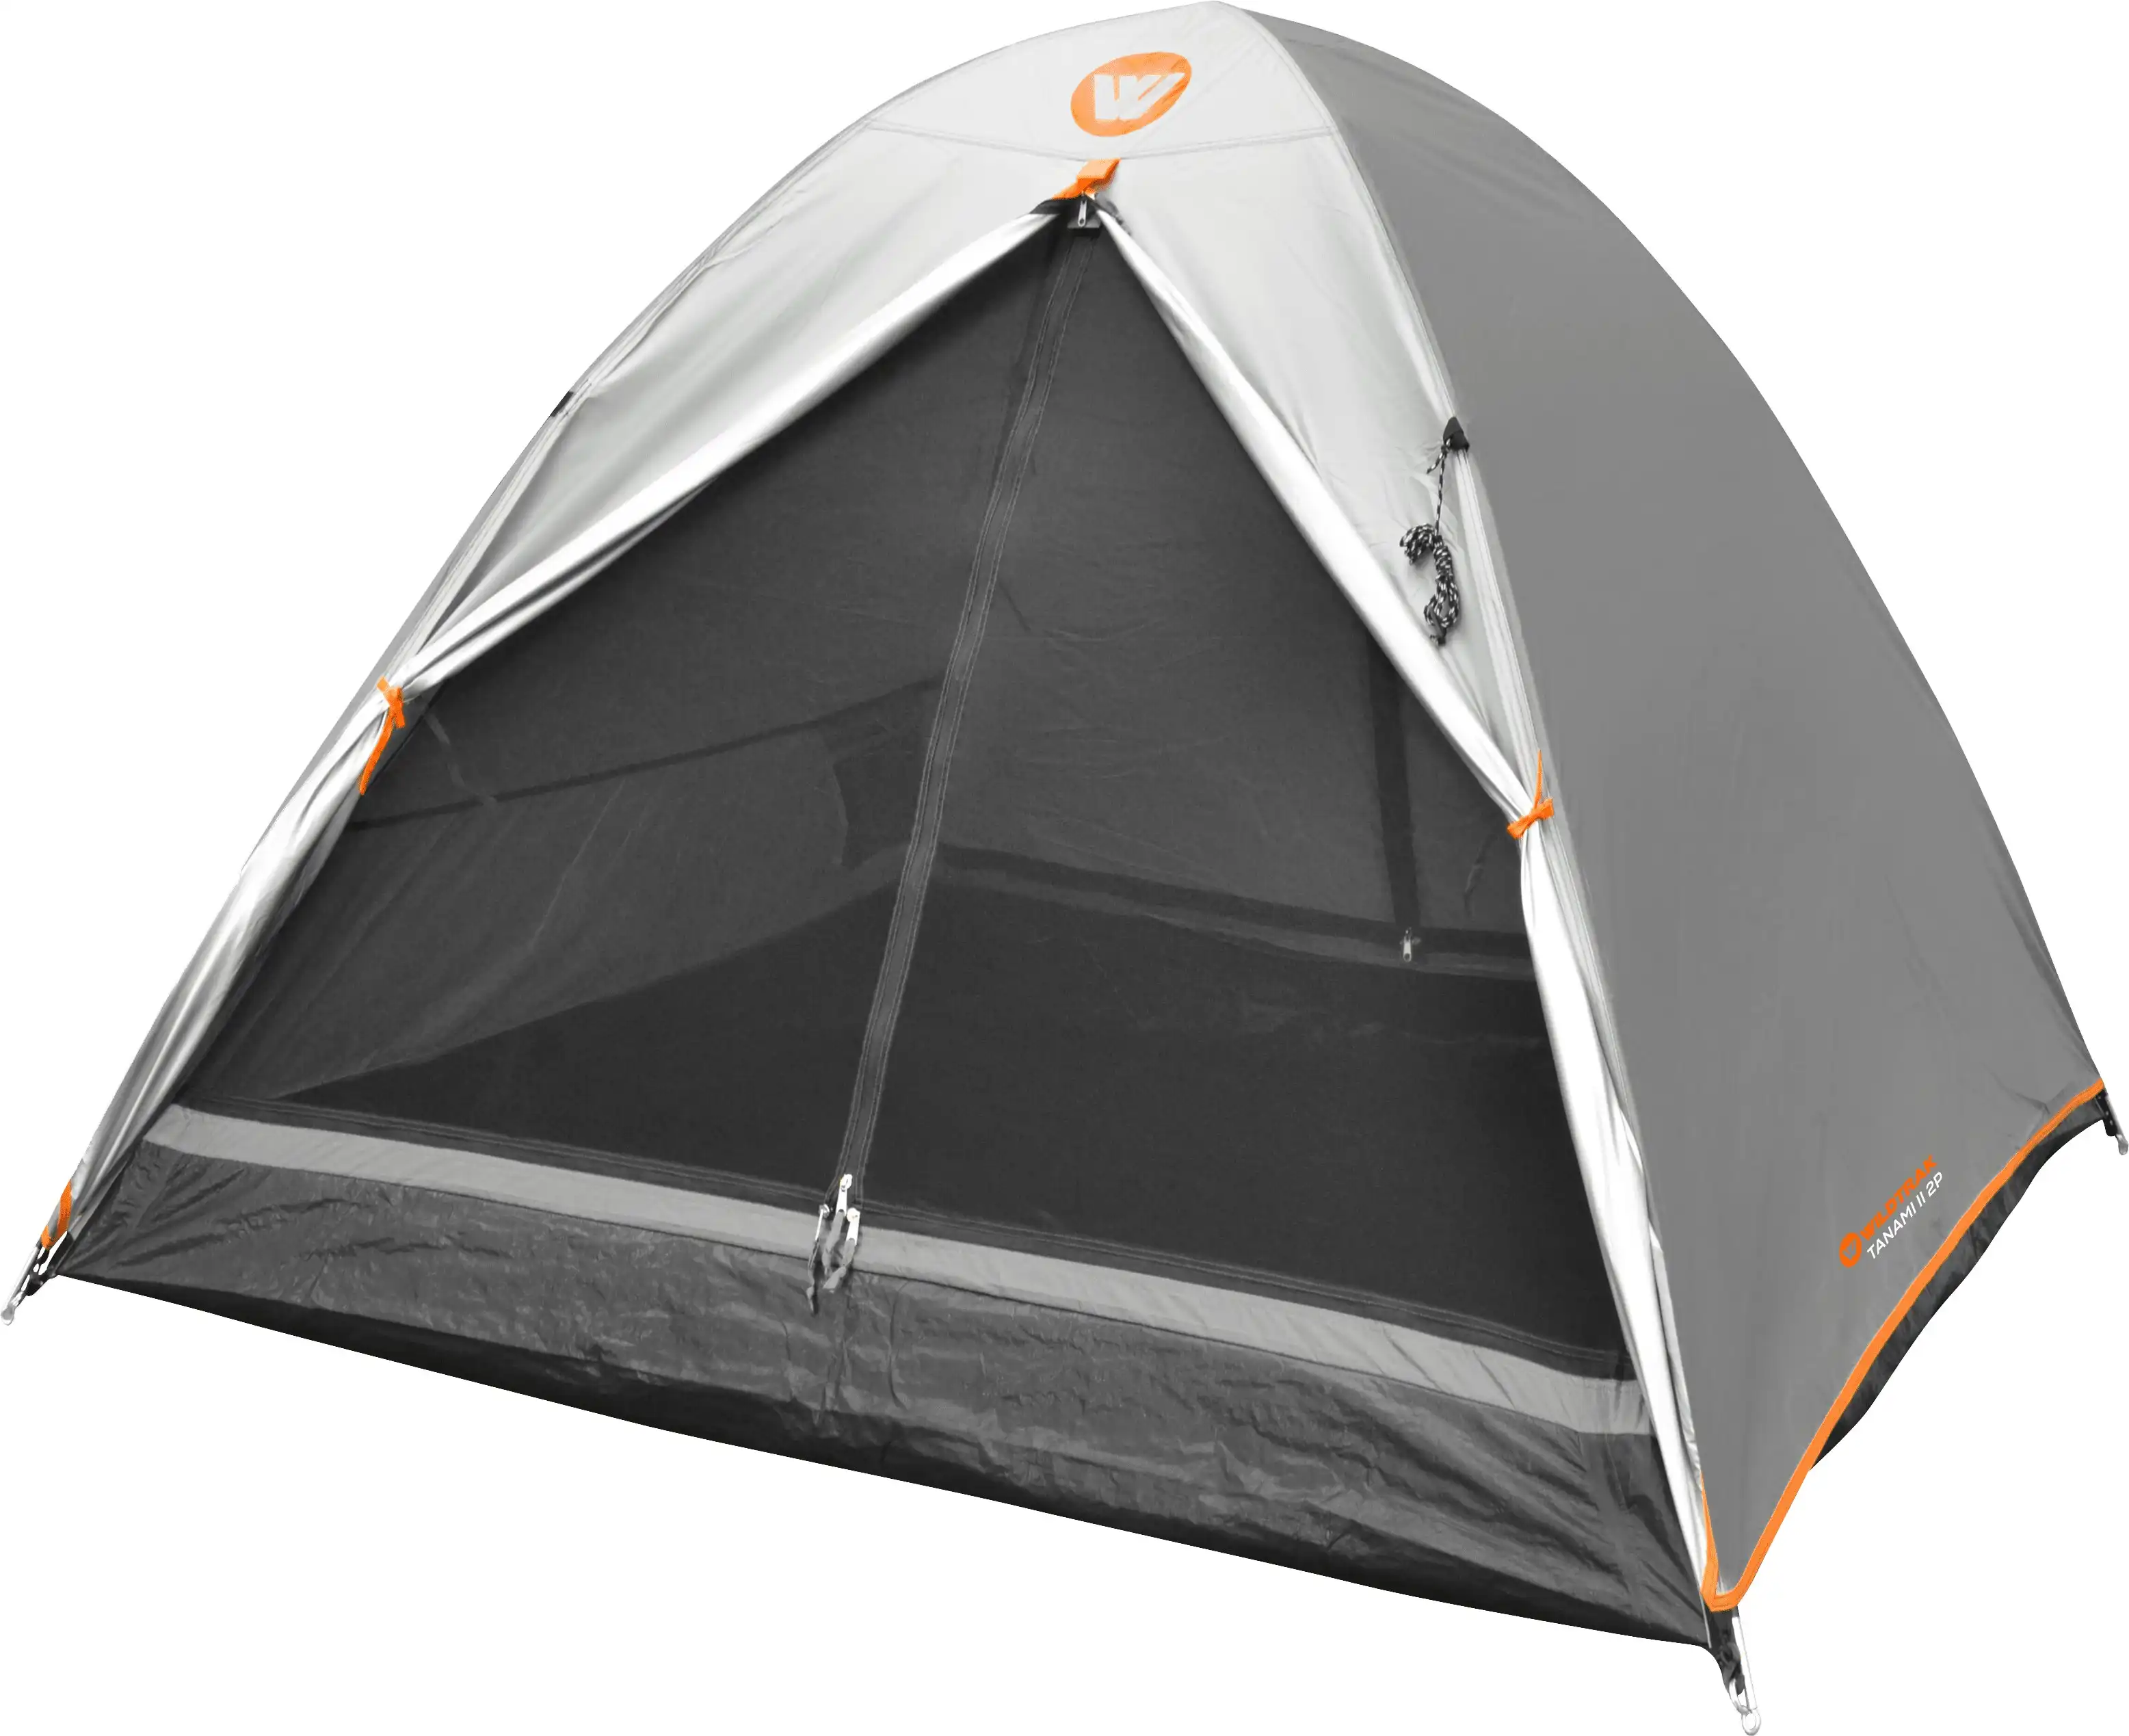 Tanami Series Ii 2 Person Dome Tent